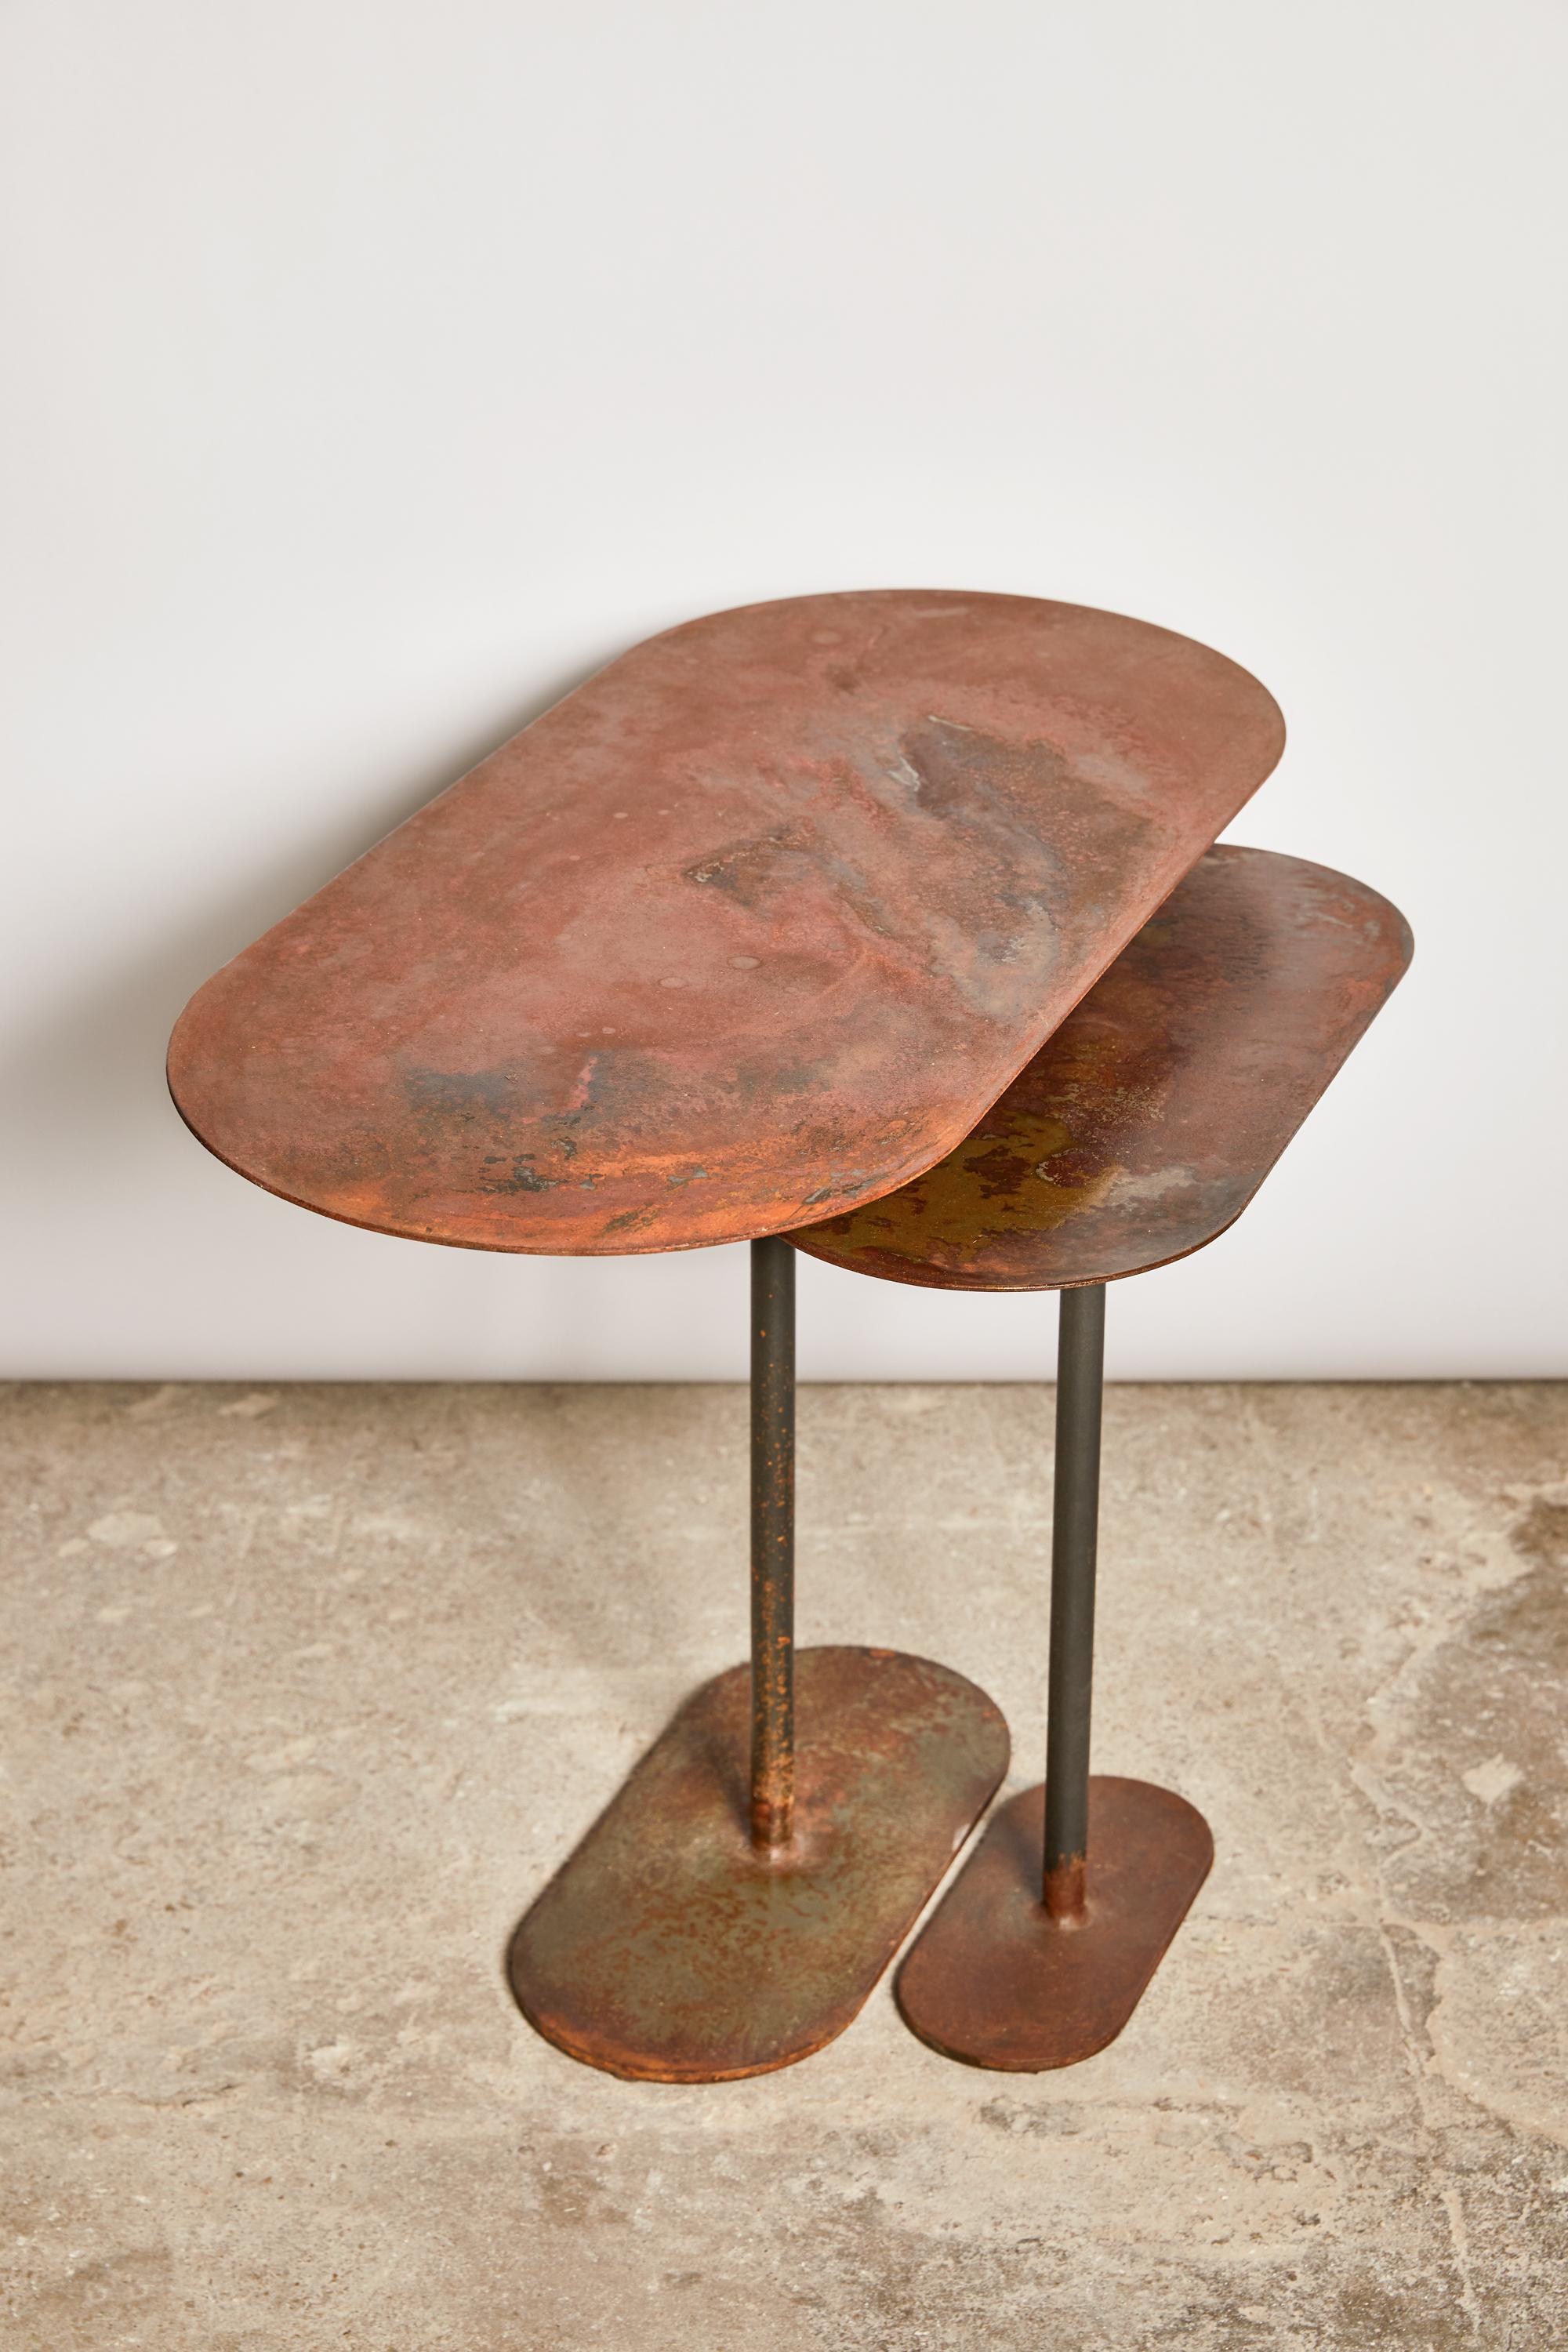 Pair of oxidized ellipses table signed by Pia Chevalier
Oxidized steel.
Dimensions:
Large 60 x 27 cm H. 45 cm
Small 40 x 18 cm H. 40 cm

Pia Chevalier is a French contemporary designer.
Independent Designer, trained in Design and Crafts and